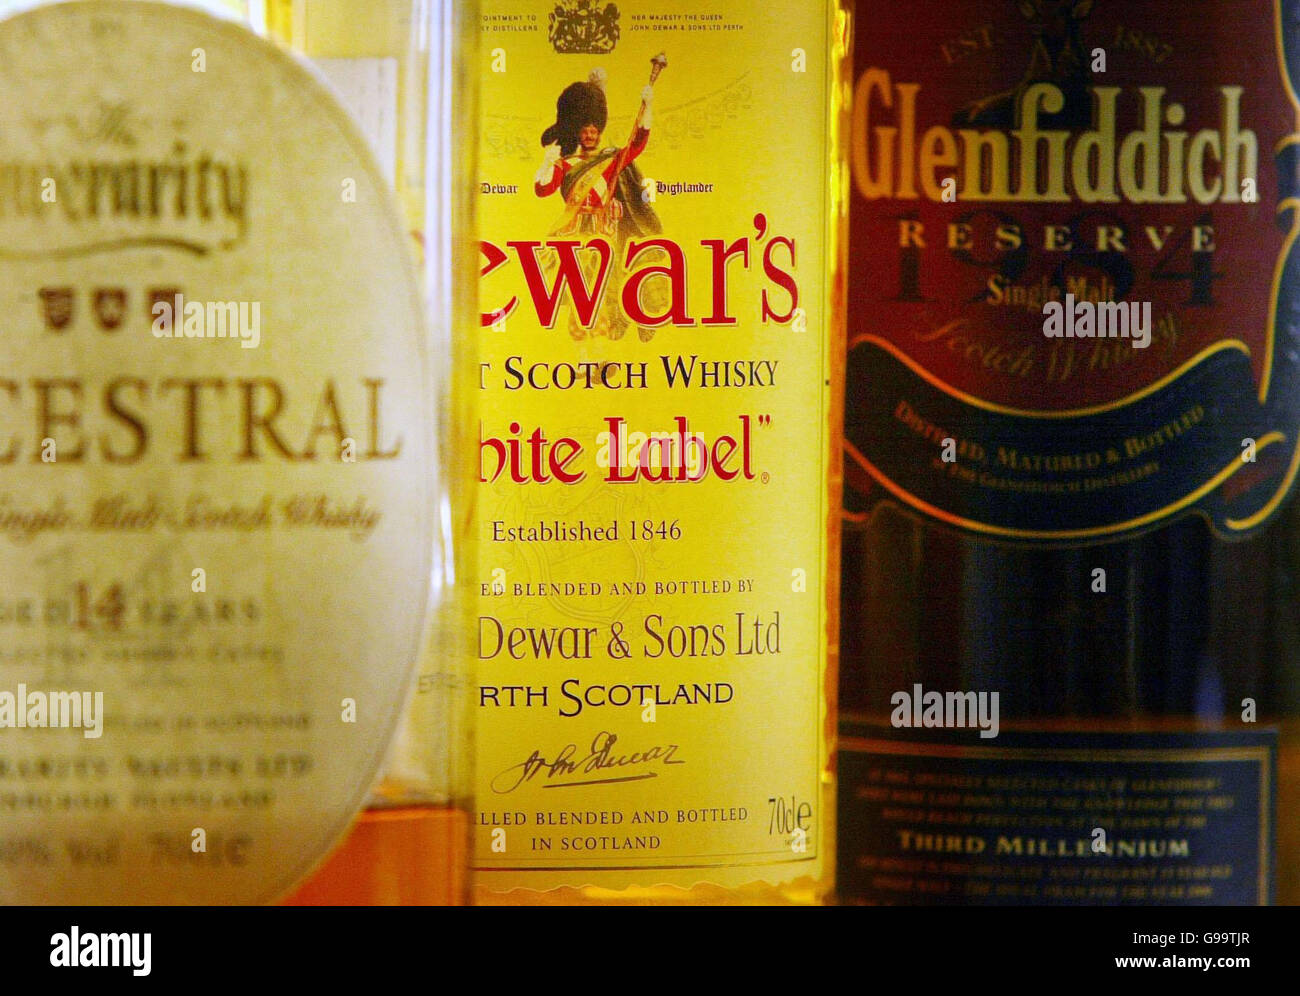 LEGAL Whisky. Malt Whisky produced in Scotland. Stock Photo